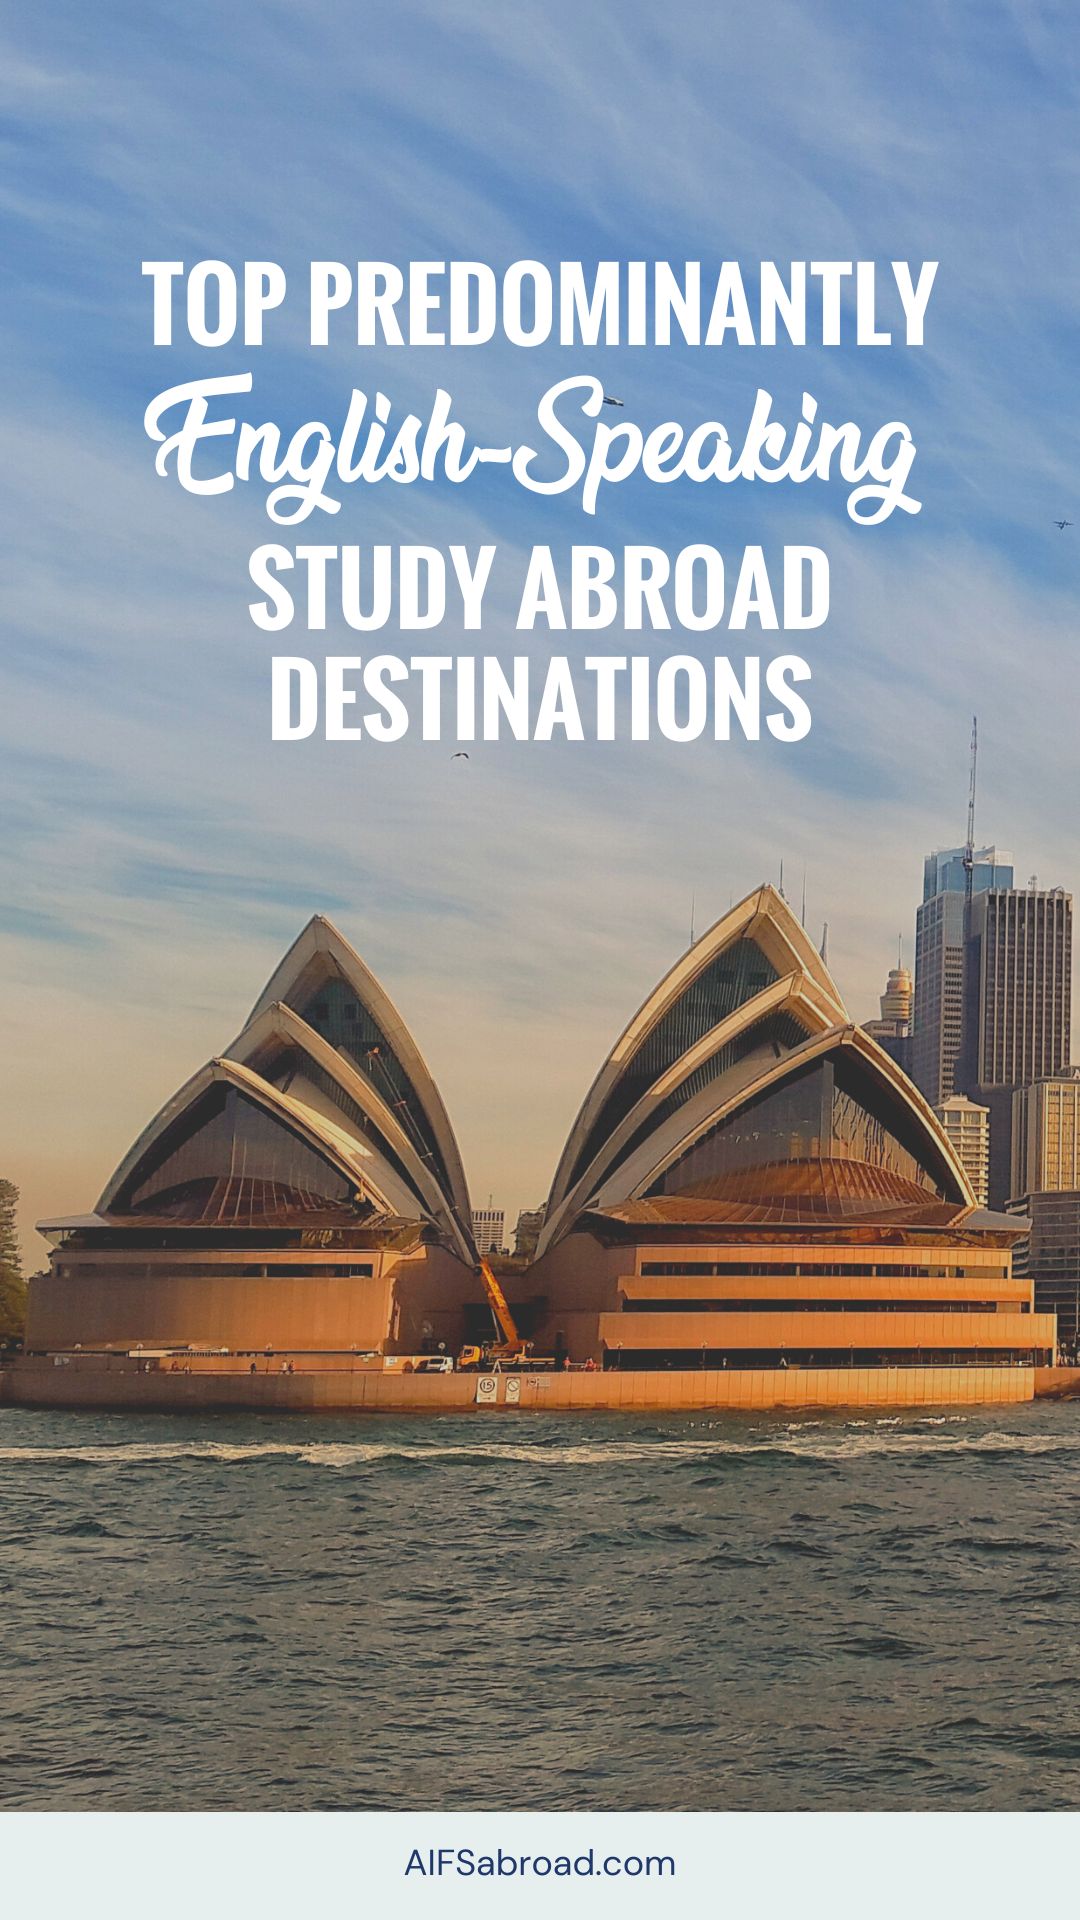 Pin Image of the Opera House in Sydney Harbor, Australia with text saying "Top Predominantly English-Speaking Study Abroad Destinations"